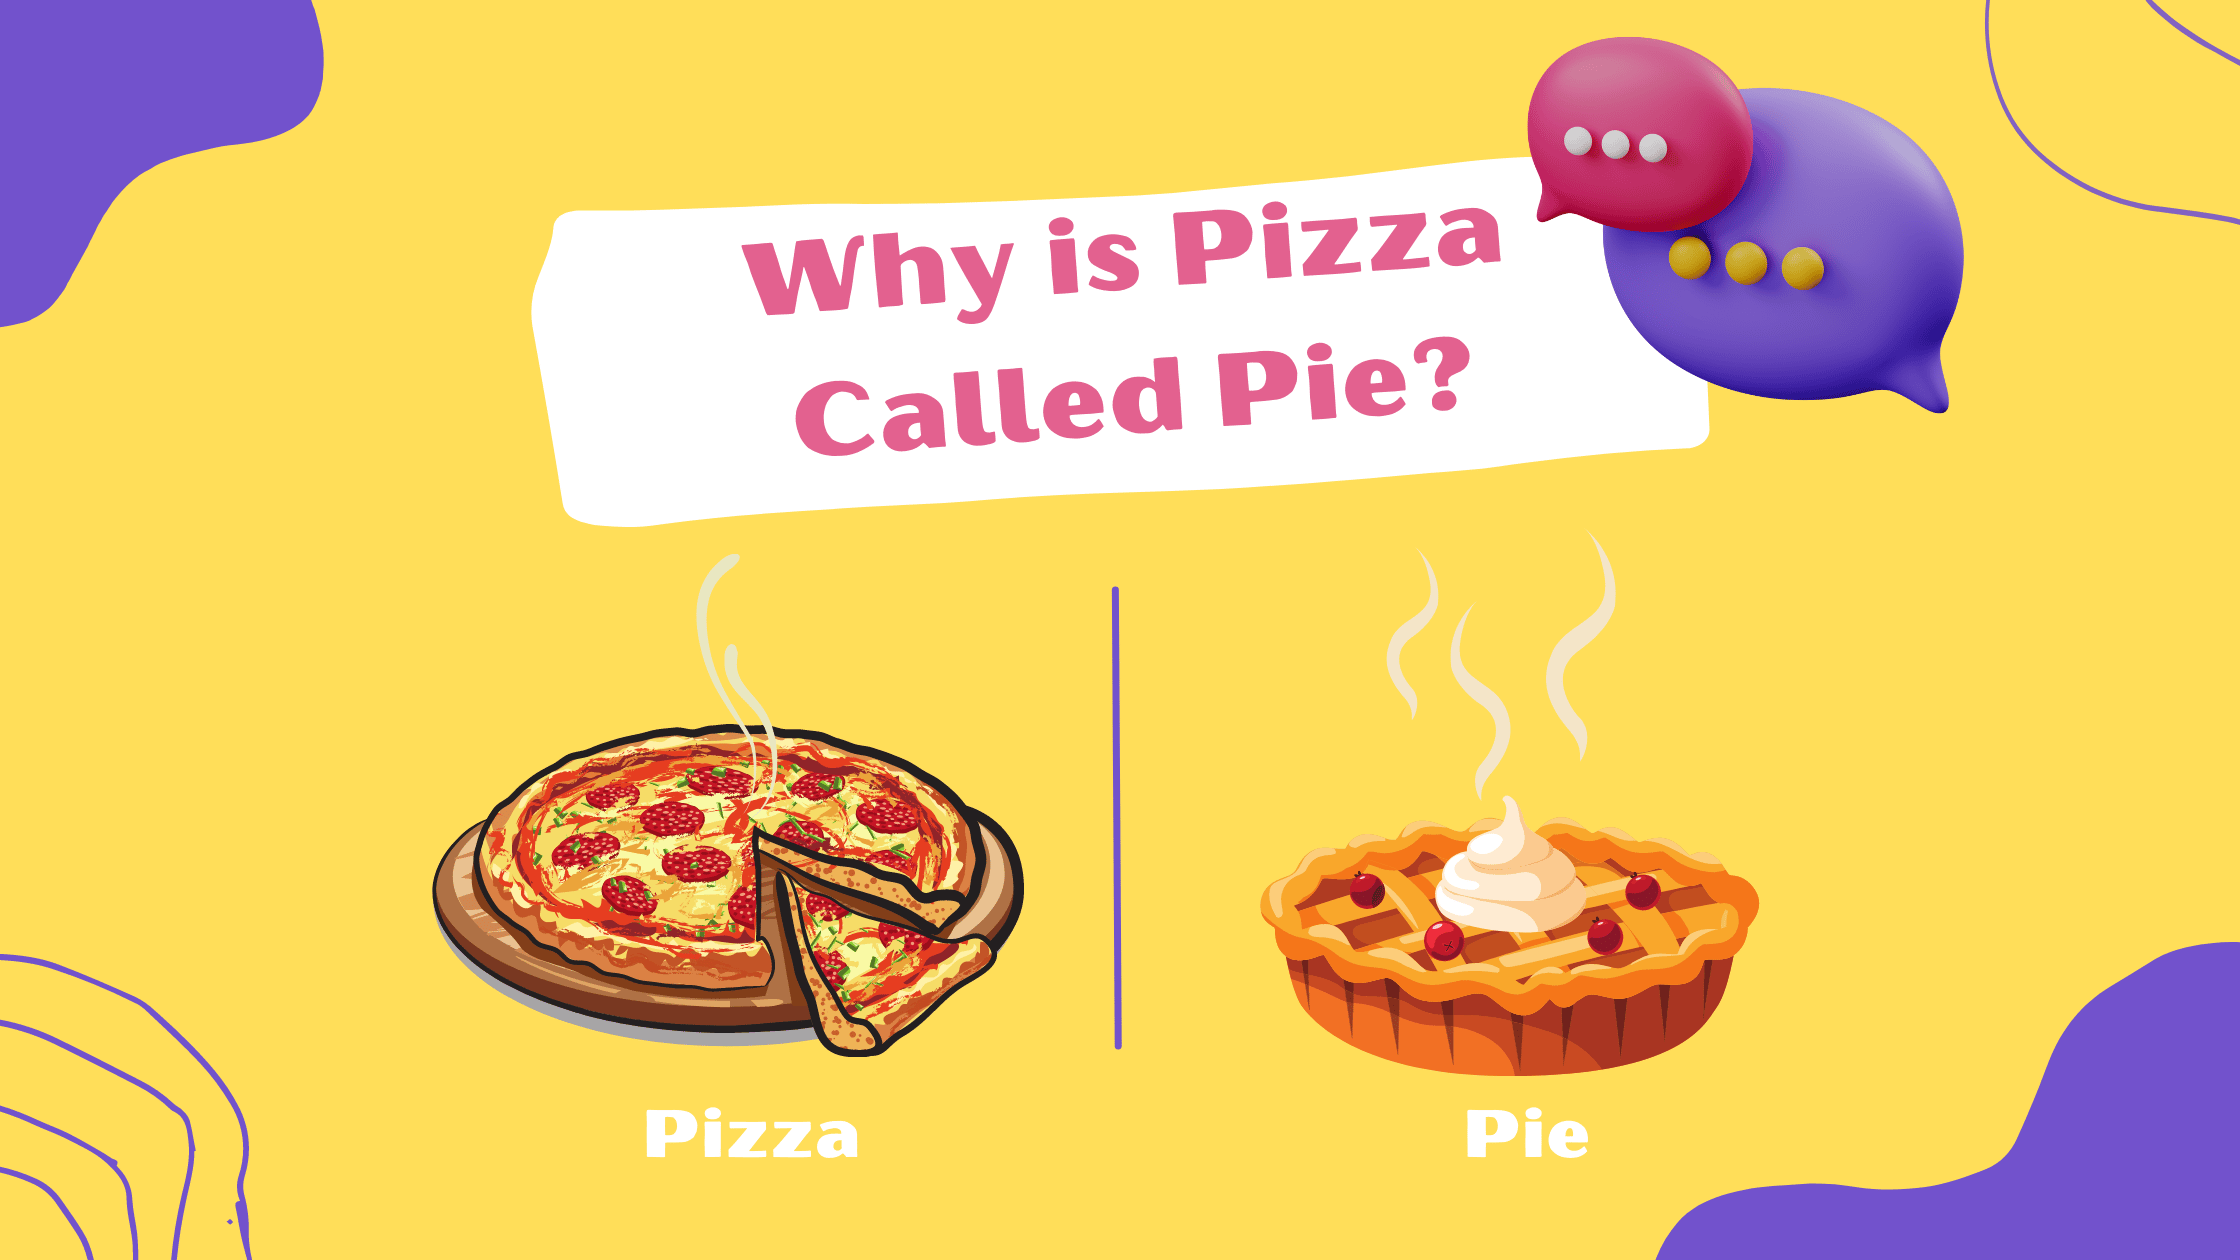 “Why is Pizza Called Pie? Here’s Everything You Need to Know